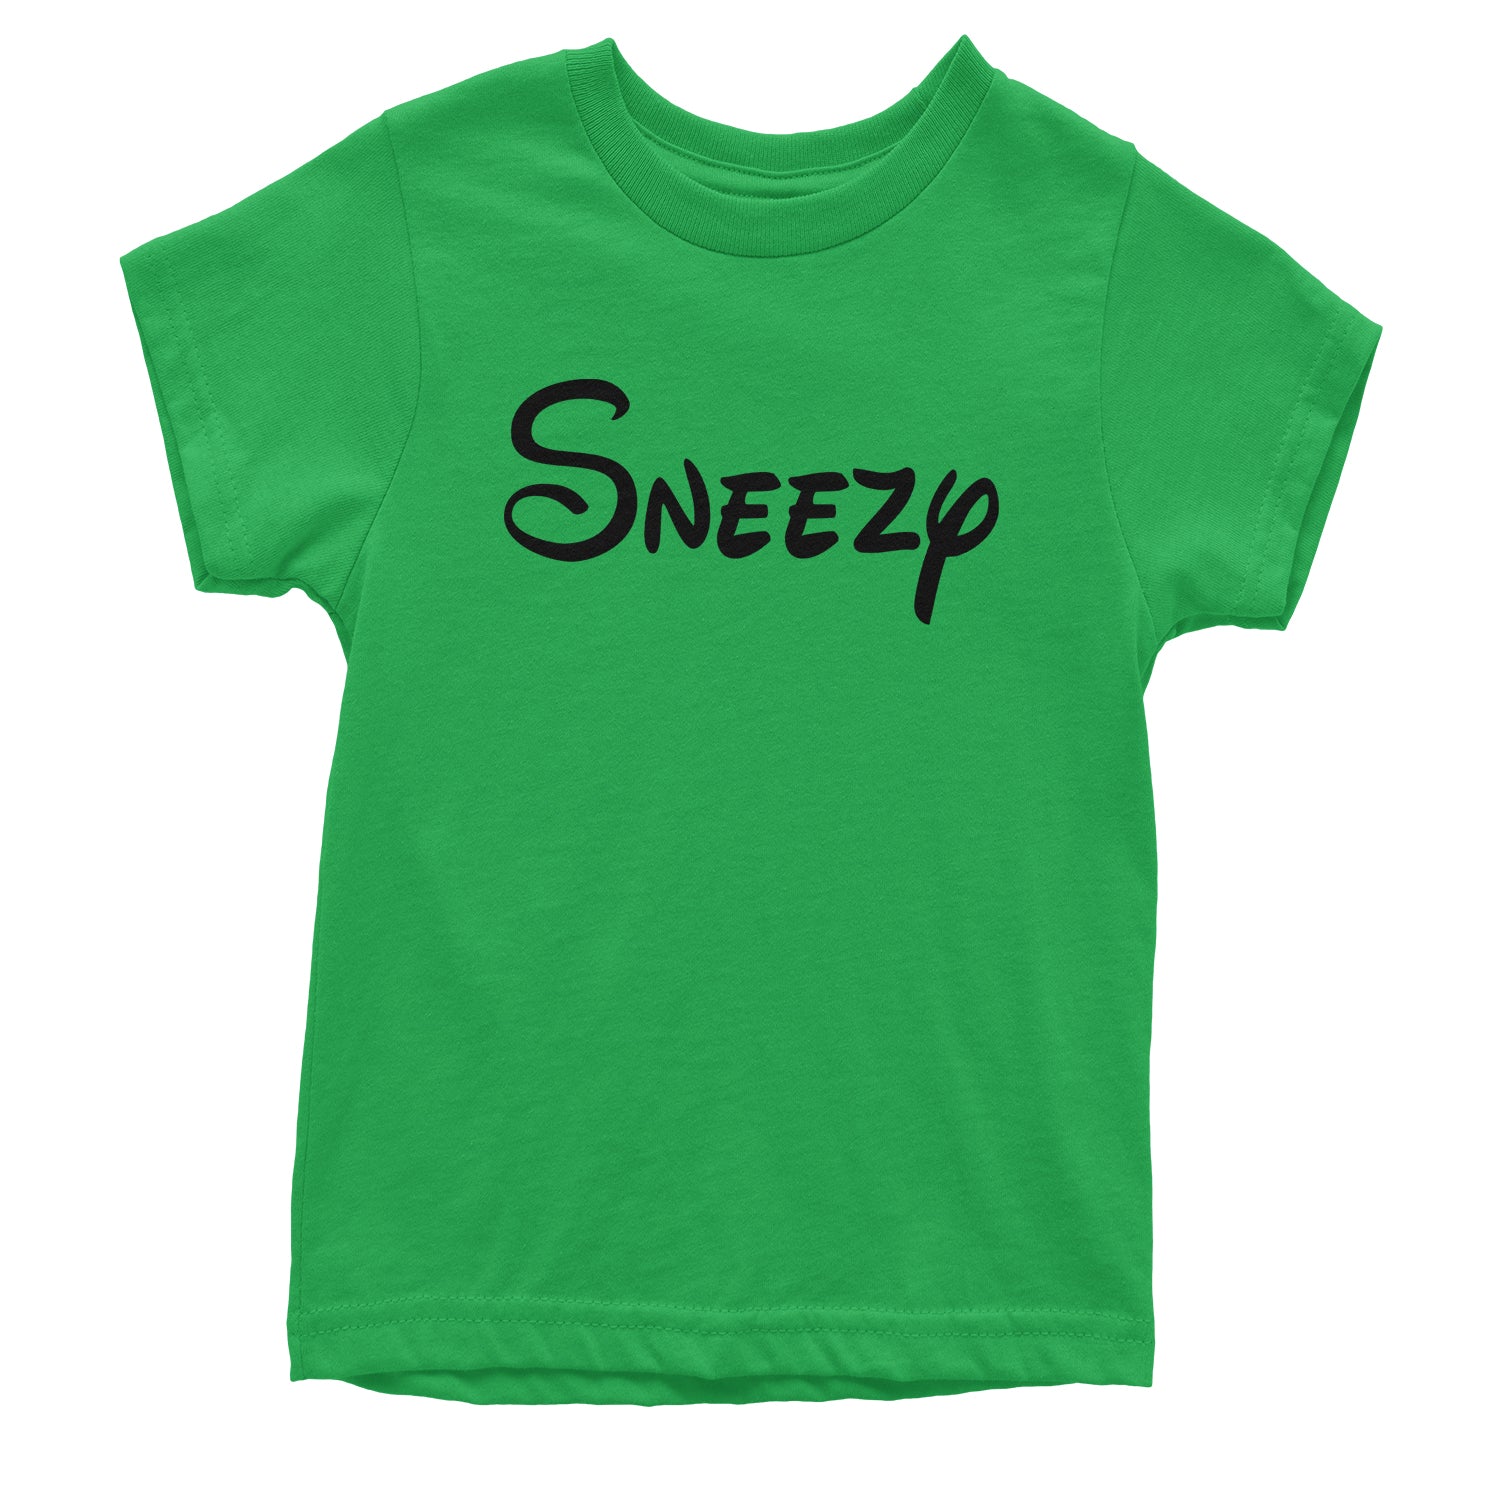 Sneezy - 7 Dwarfs Costume Youth T-shirt and, costume, dwarfs, group, halloween, matching, seven, snow, the, white by Expression Tees